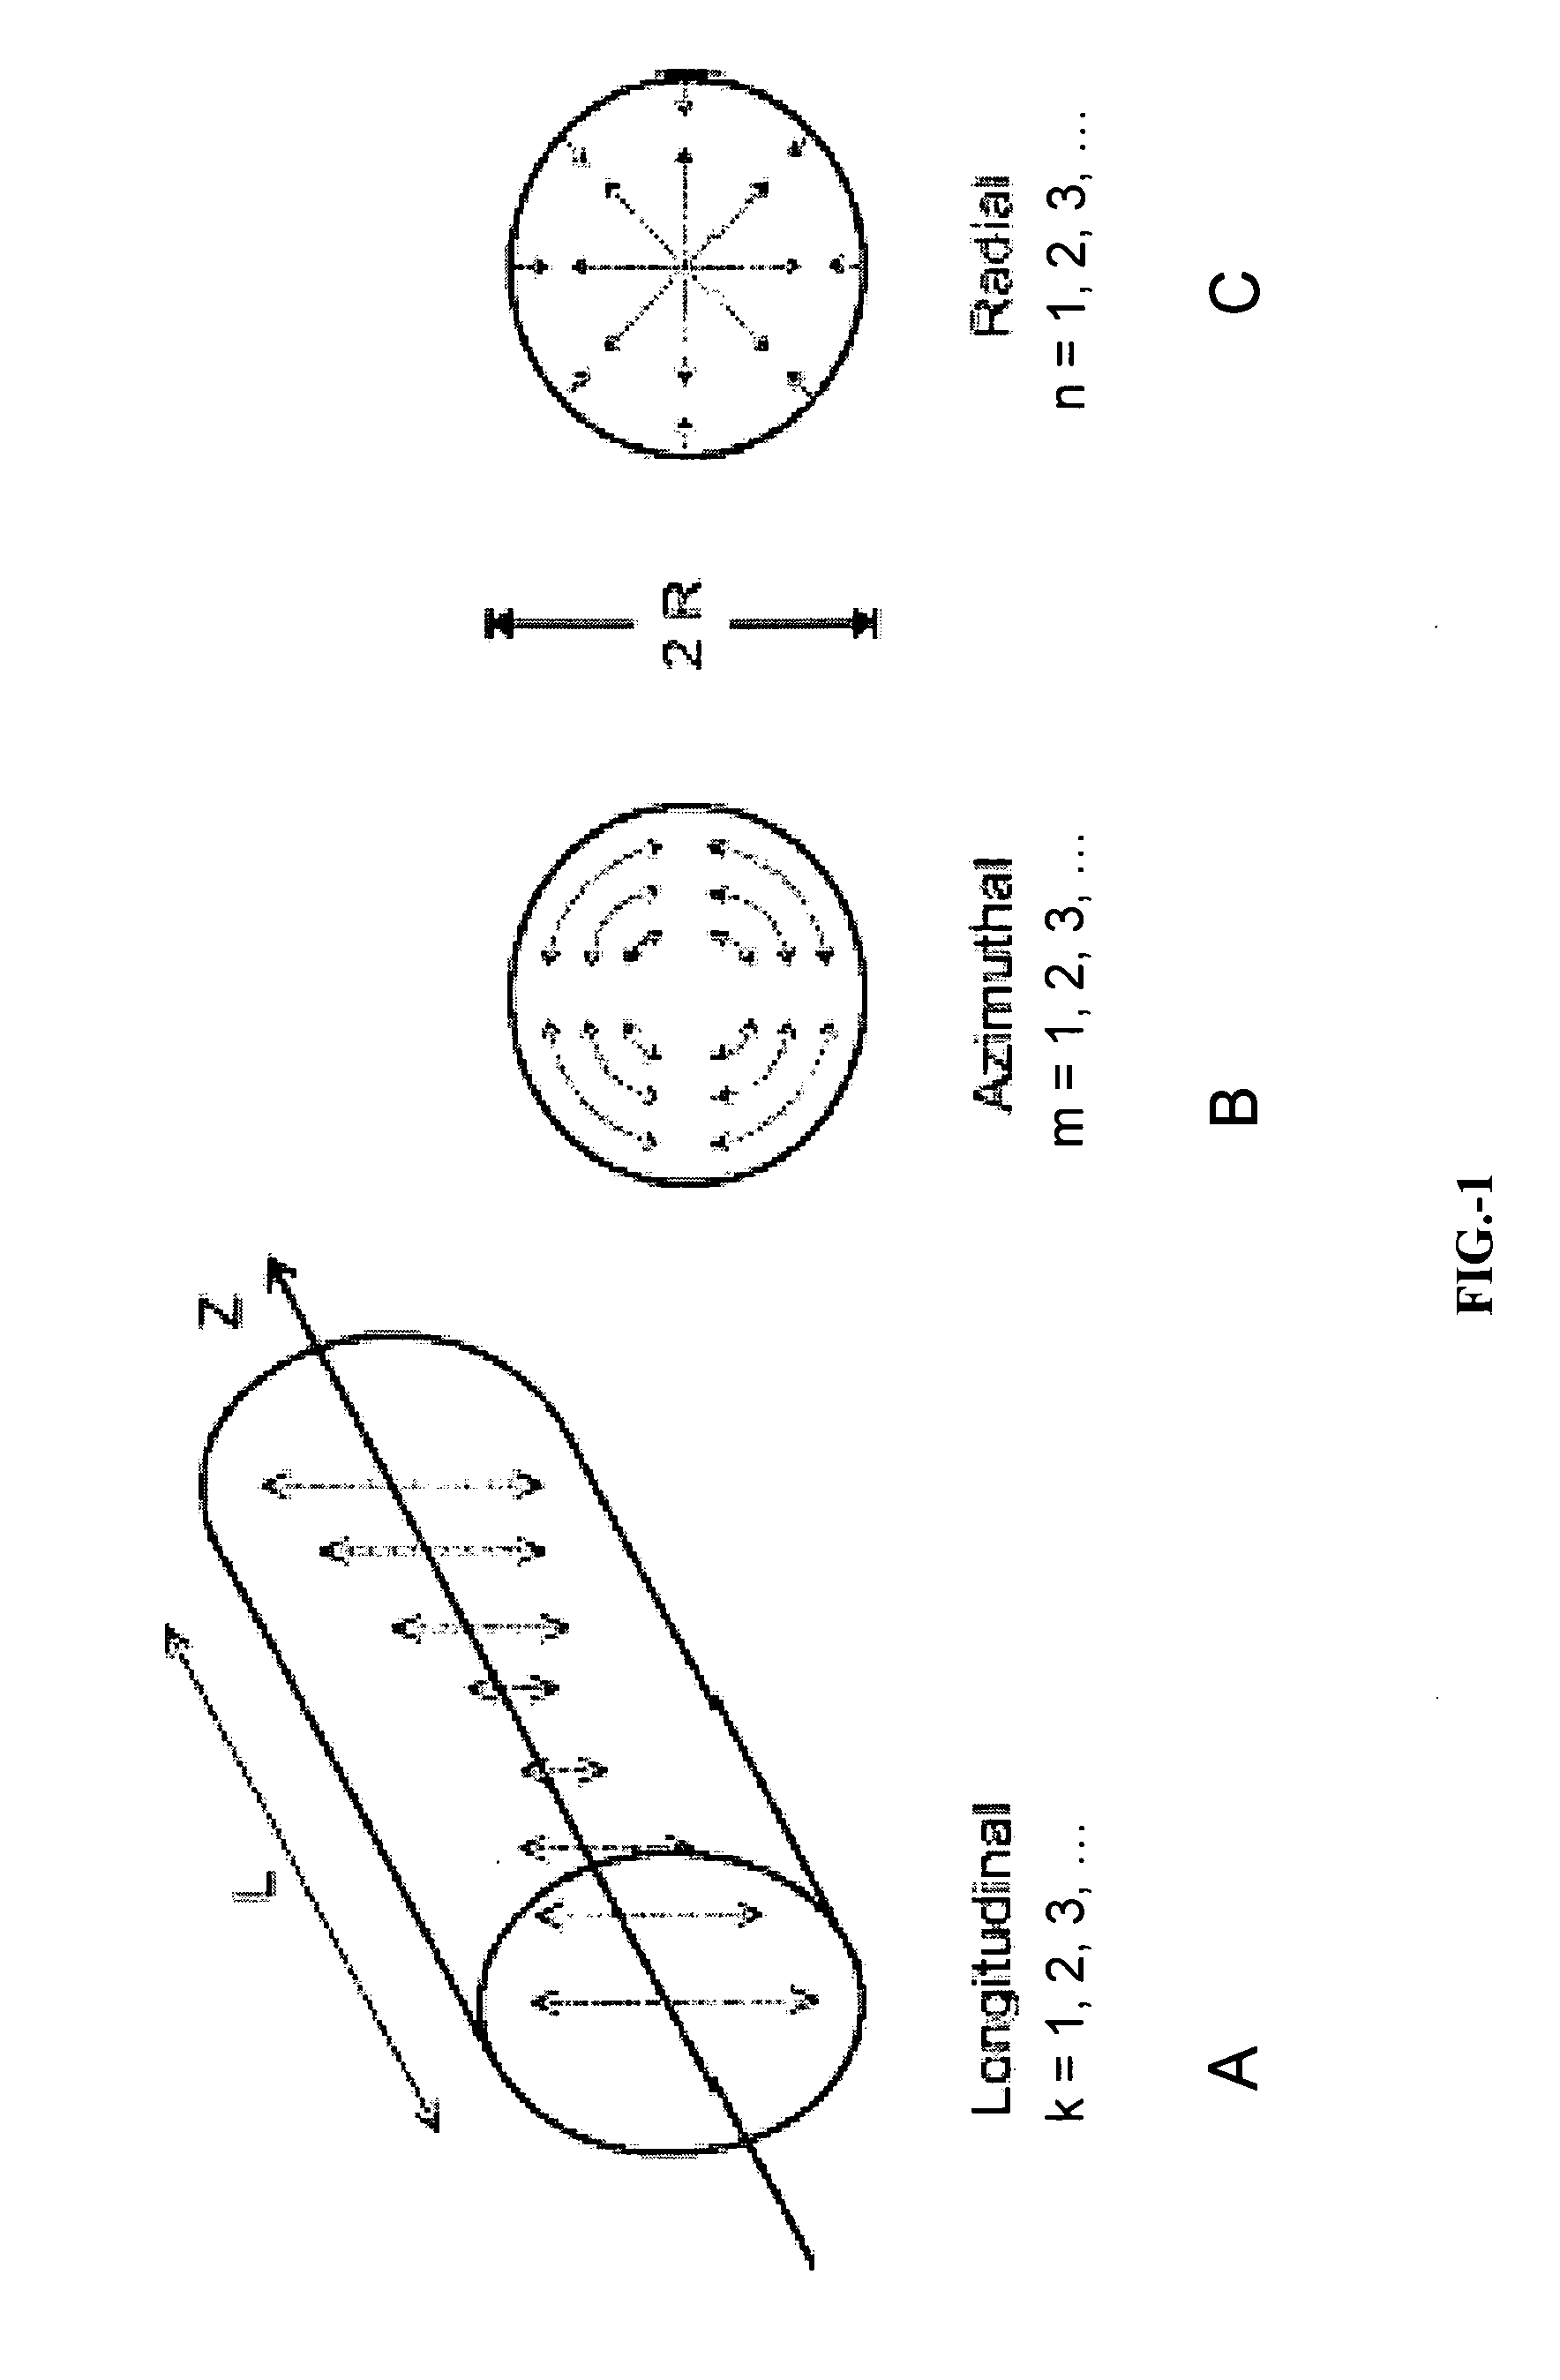 System and method for gas analysis using doubly resonant photoacoustic spectroscopy